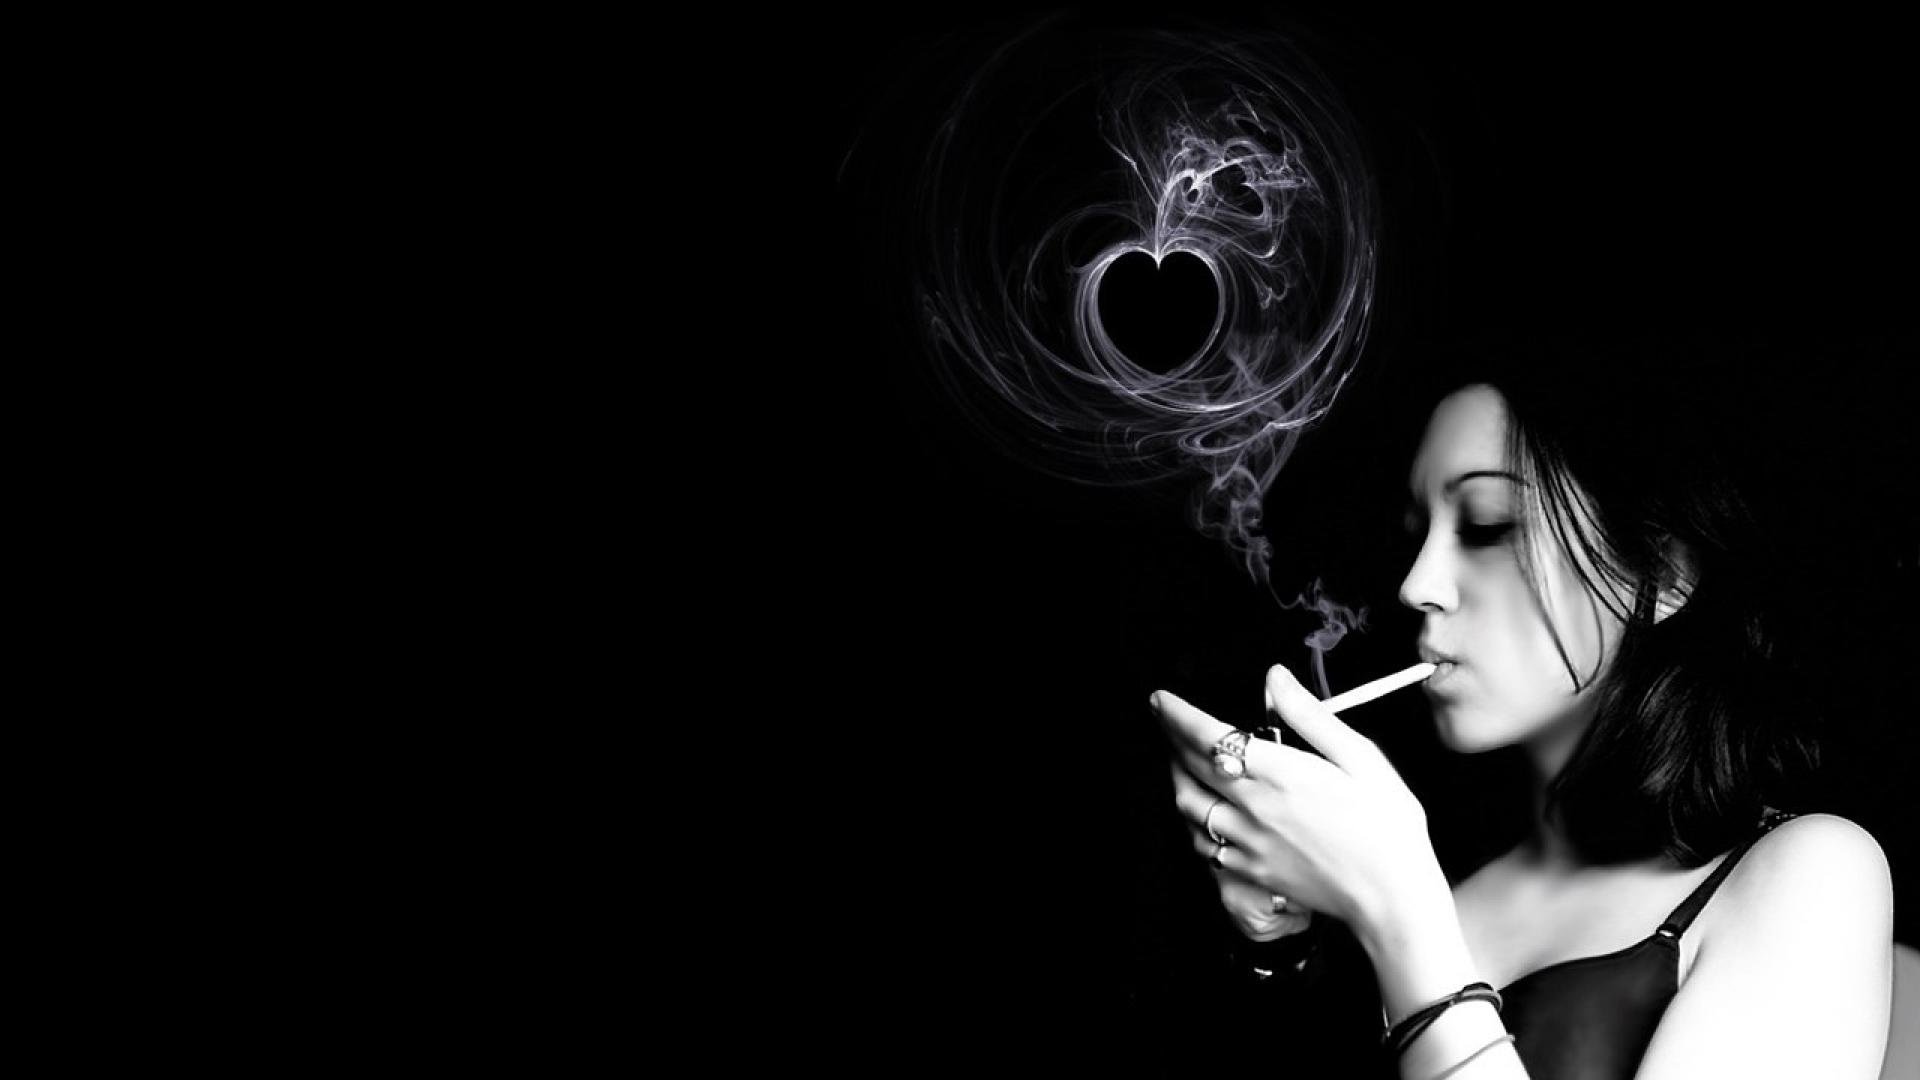 Smoking 4K wallpapers for your desktop or mobile screen free and easy to  download